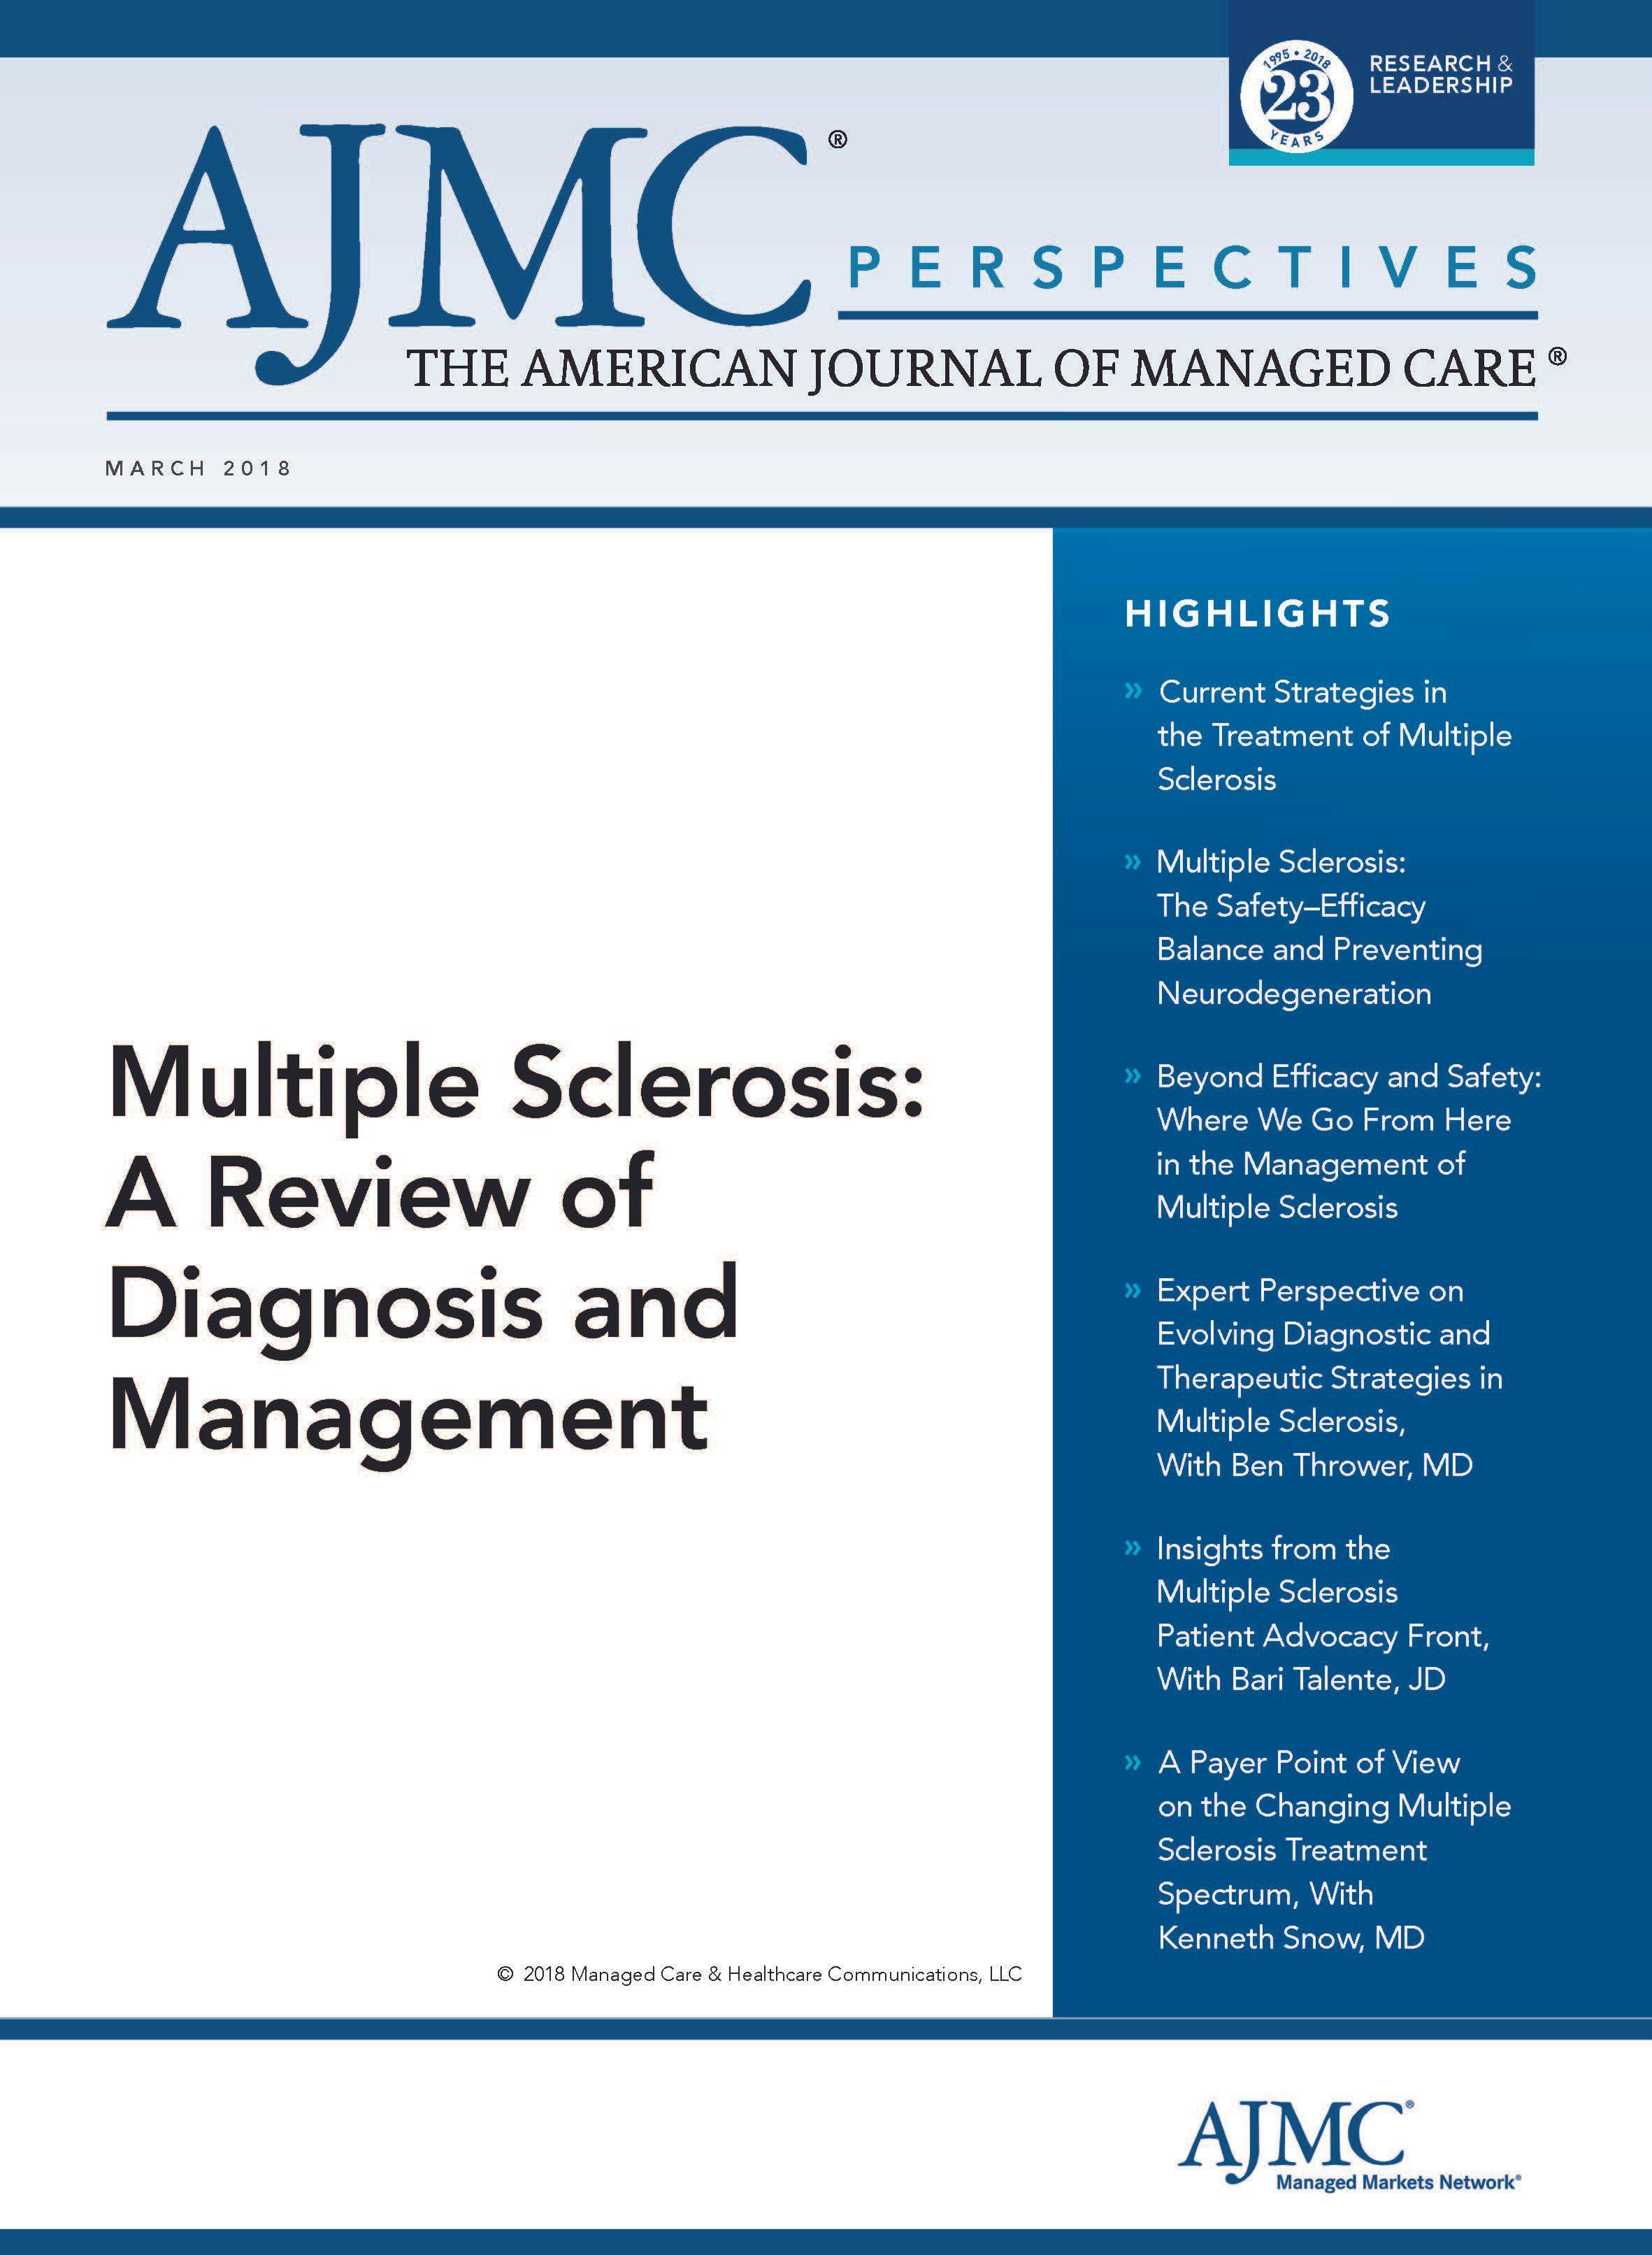 Multiple Sclerosis: A Review of Diagnosis and Management